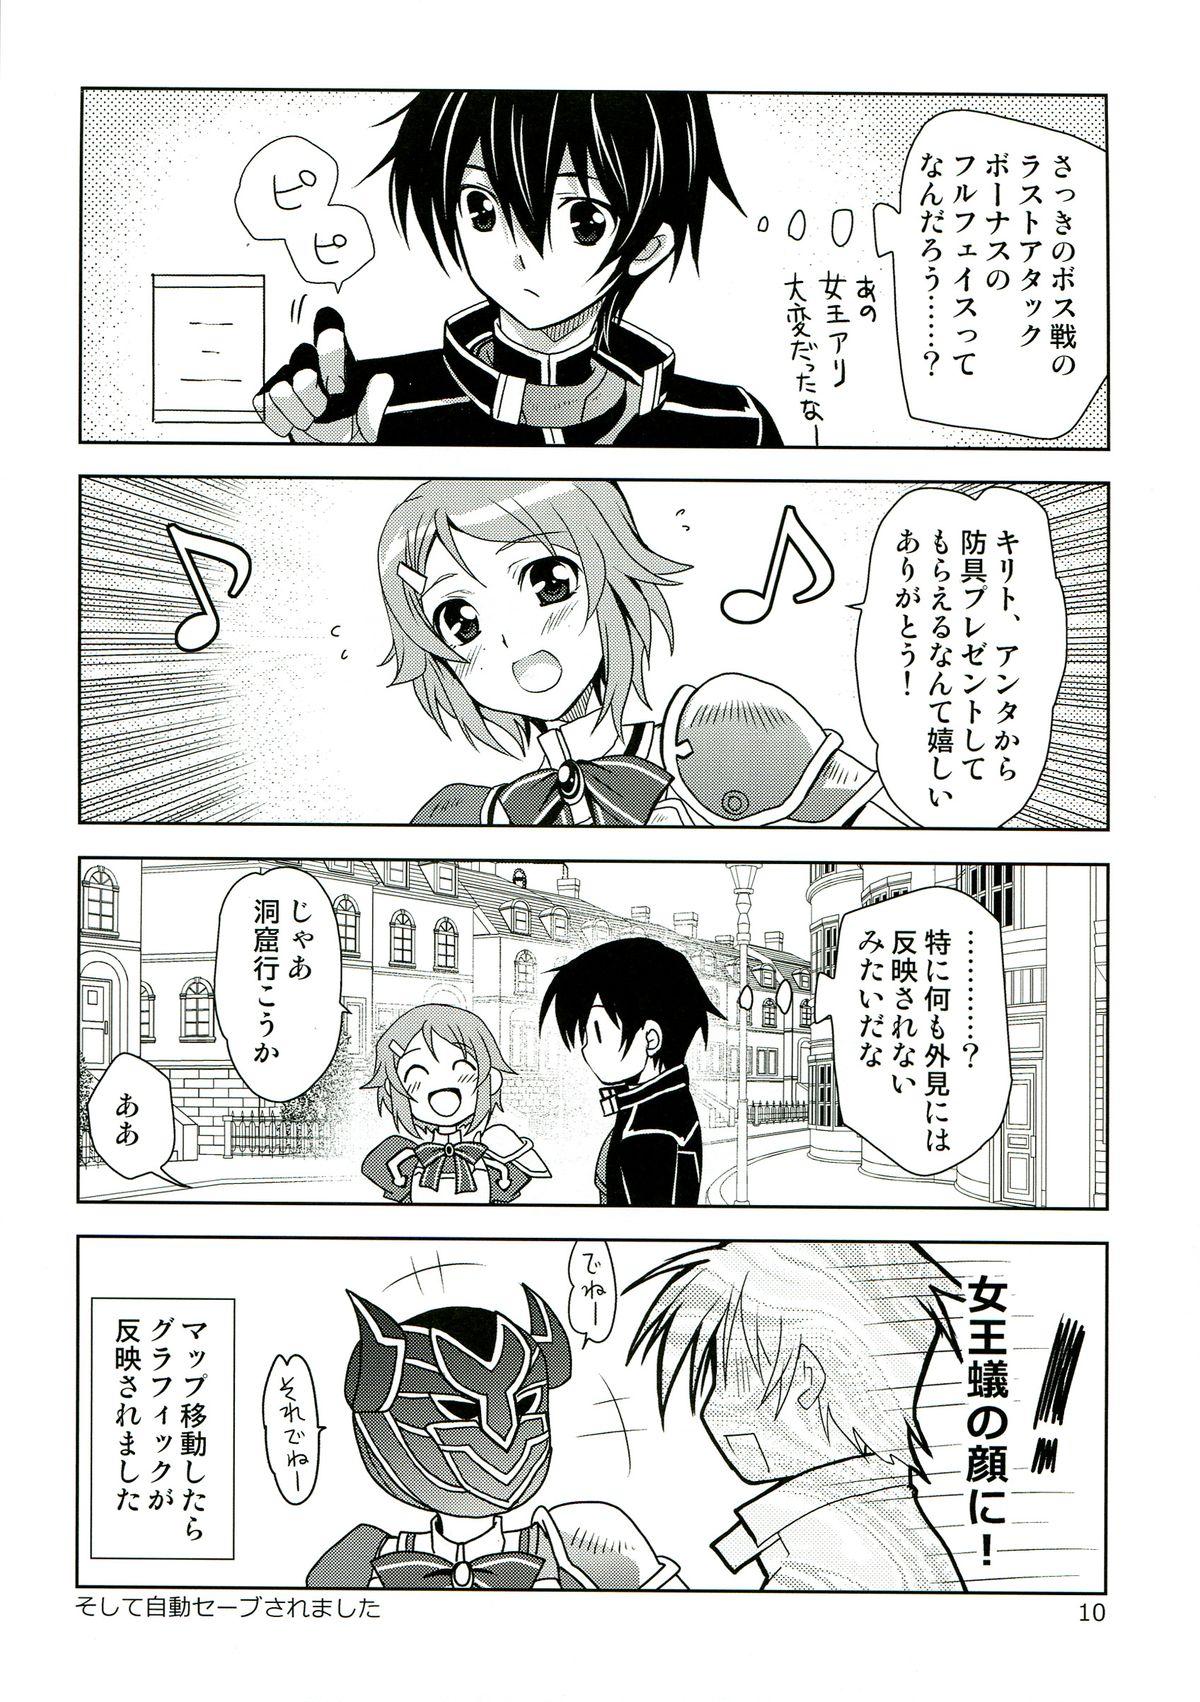 Exposed ONE MORE LOVE - Sword art online Rough Sex - Page 10